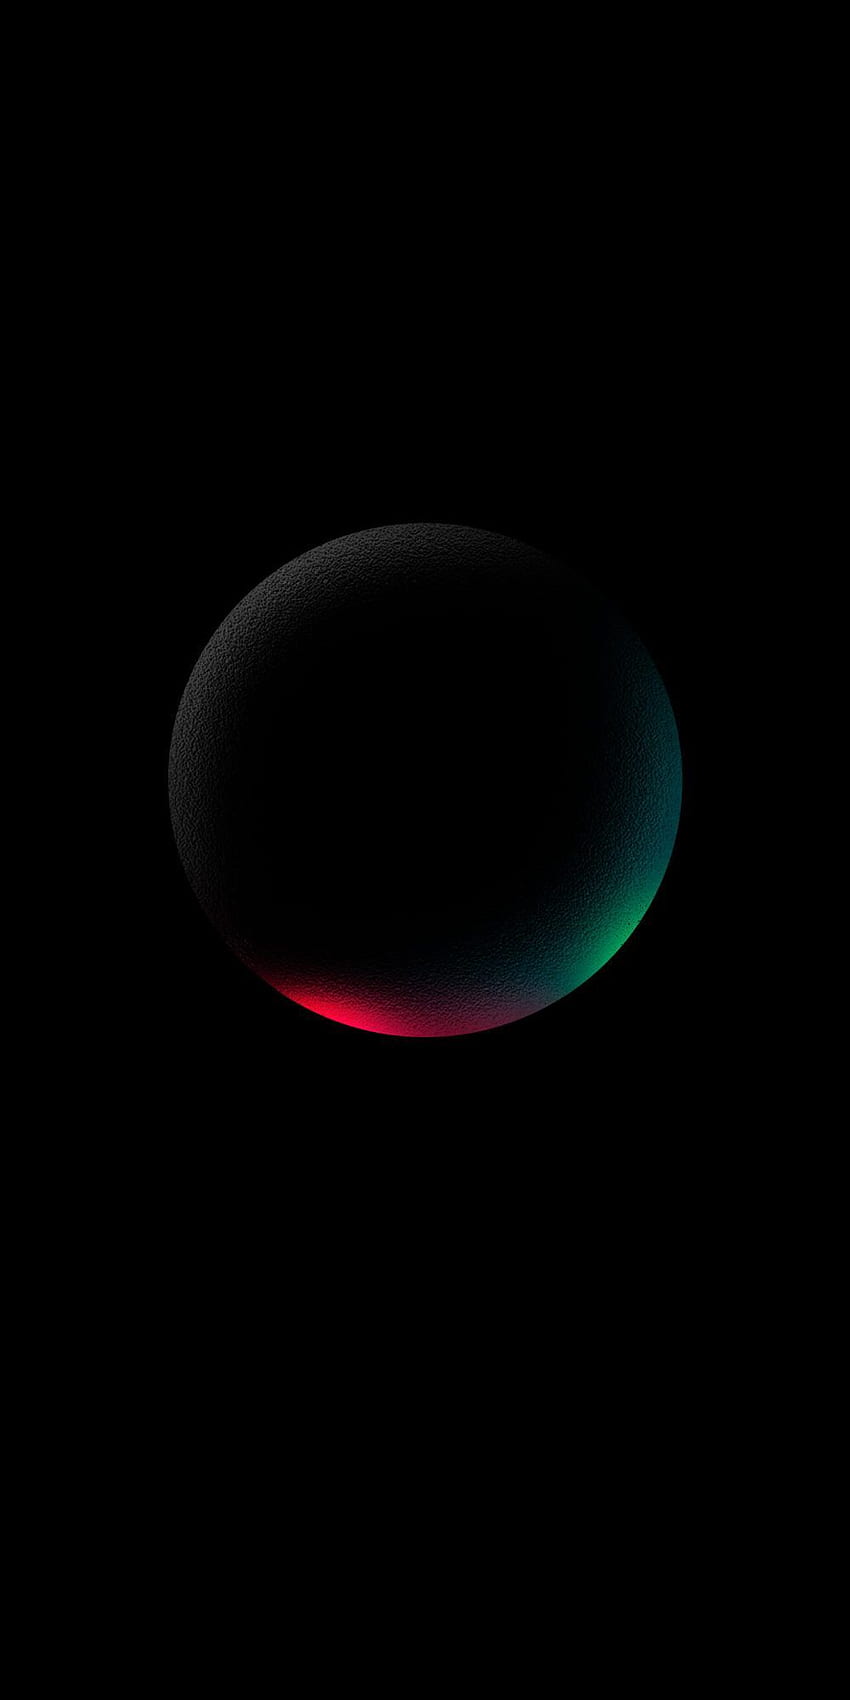 Outstanding And Mobile Background - collection of mine in 2020. Minimalist phone, Phone design, Phone HD電話の壁紙